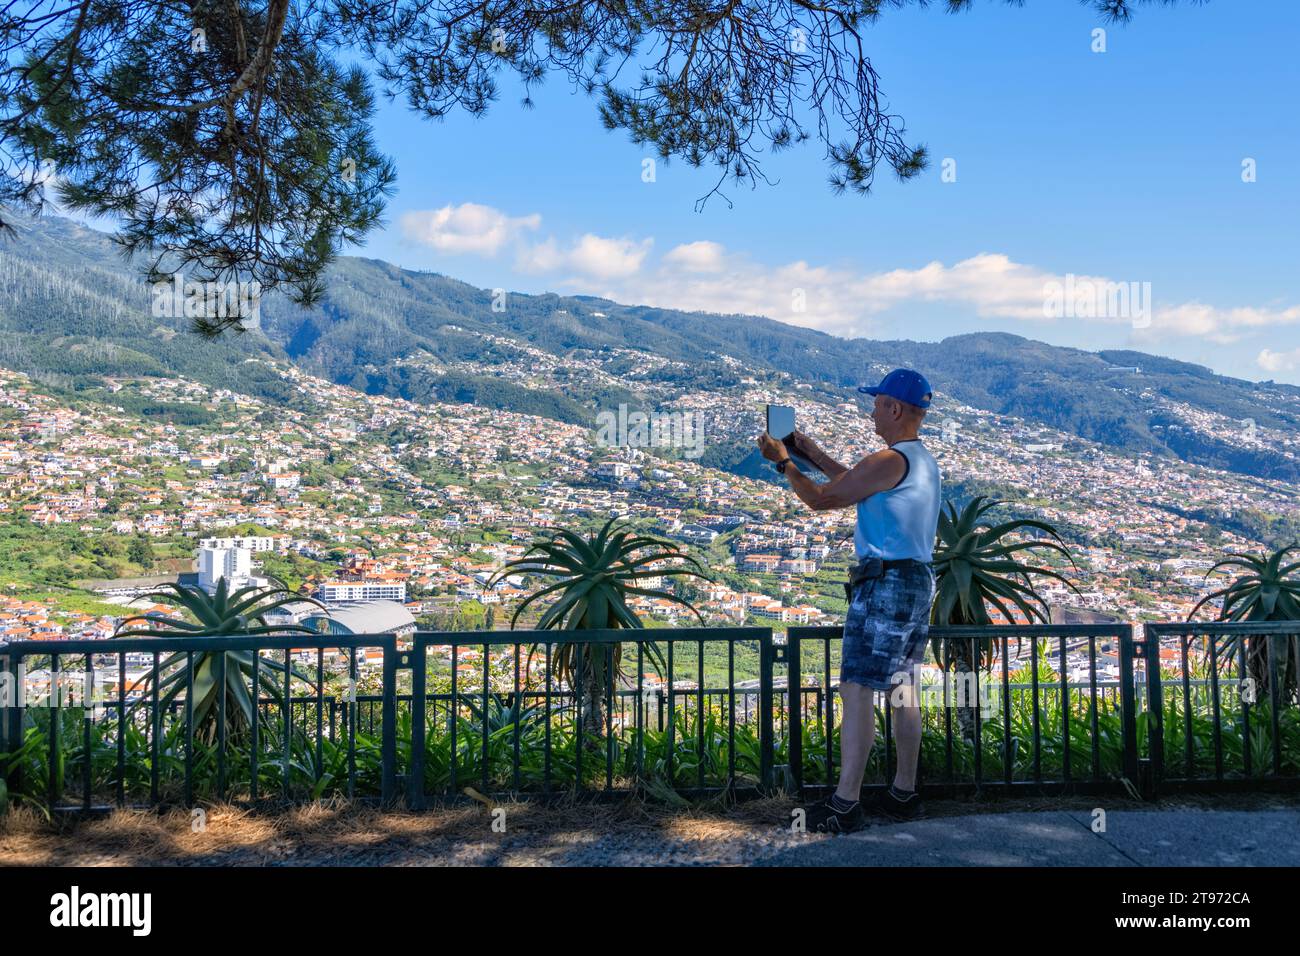 Views across Funchal Madeira from Pico dos Barcelos Viewpoint Portugal with a male tourist taking photographs Stock Photo